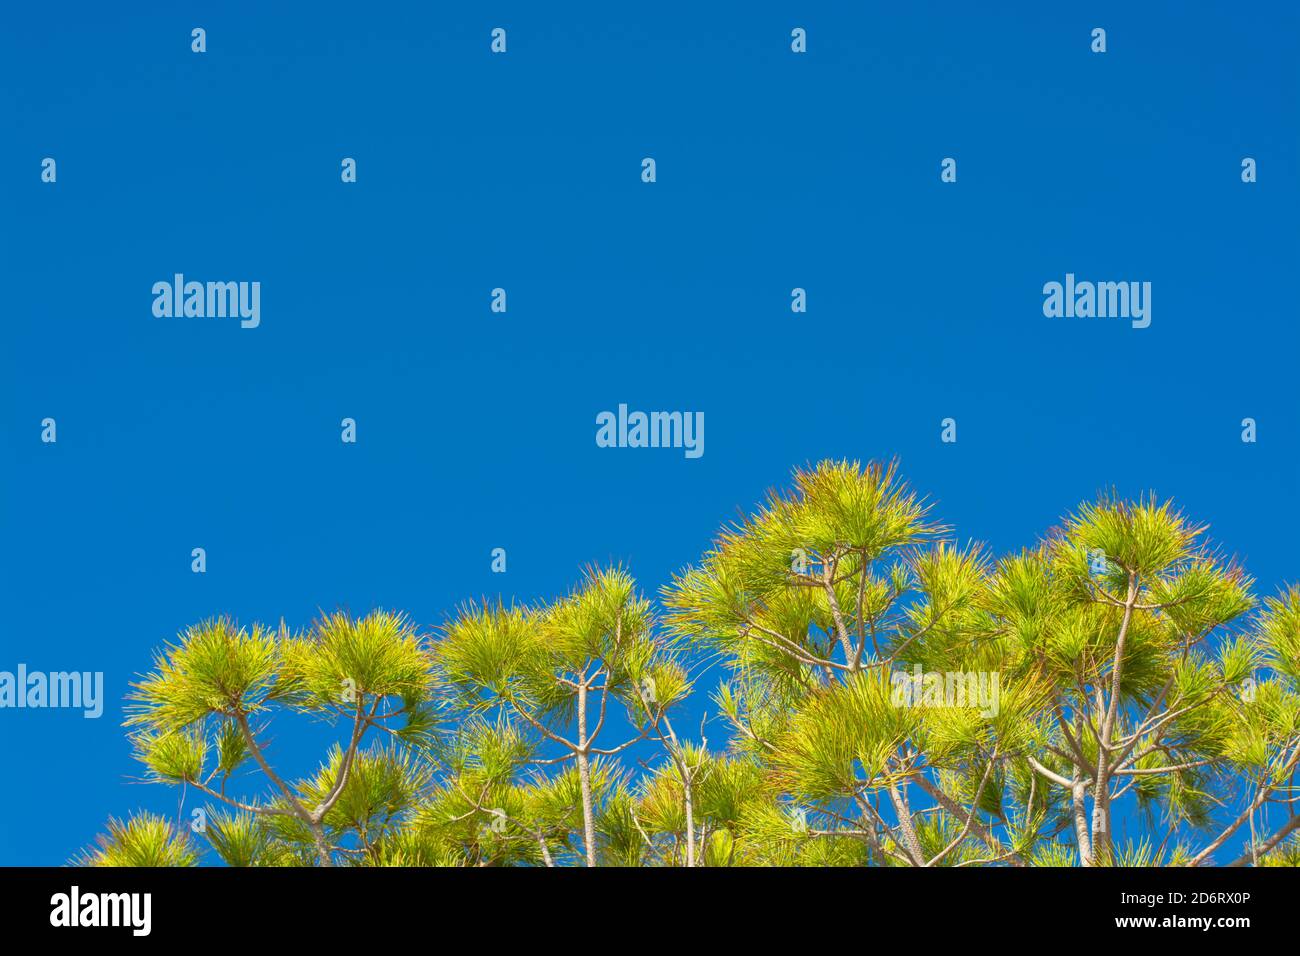 Background with tops of pinus pinea twigs lit by the sun against a blue sky in a horizontal format Stock Photo